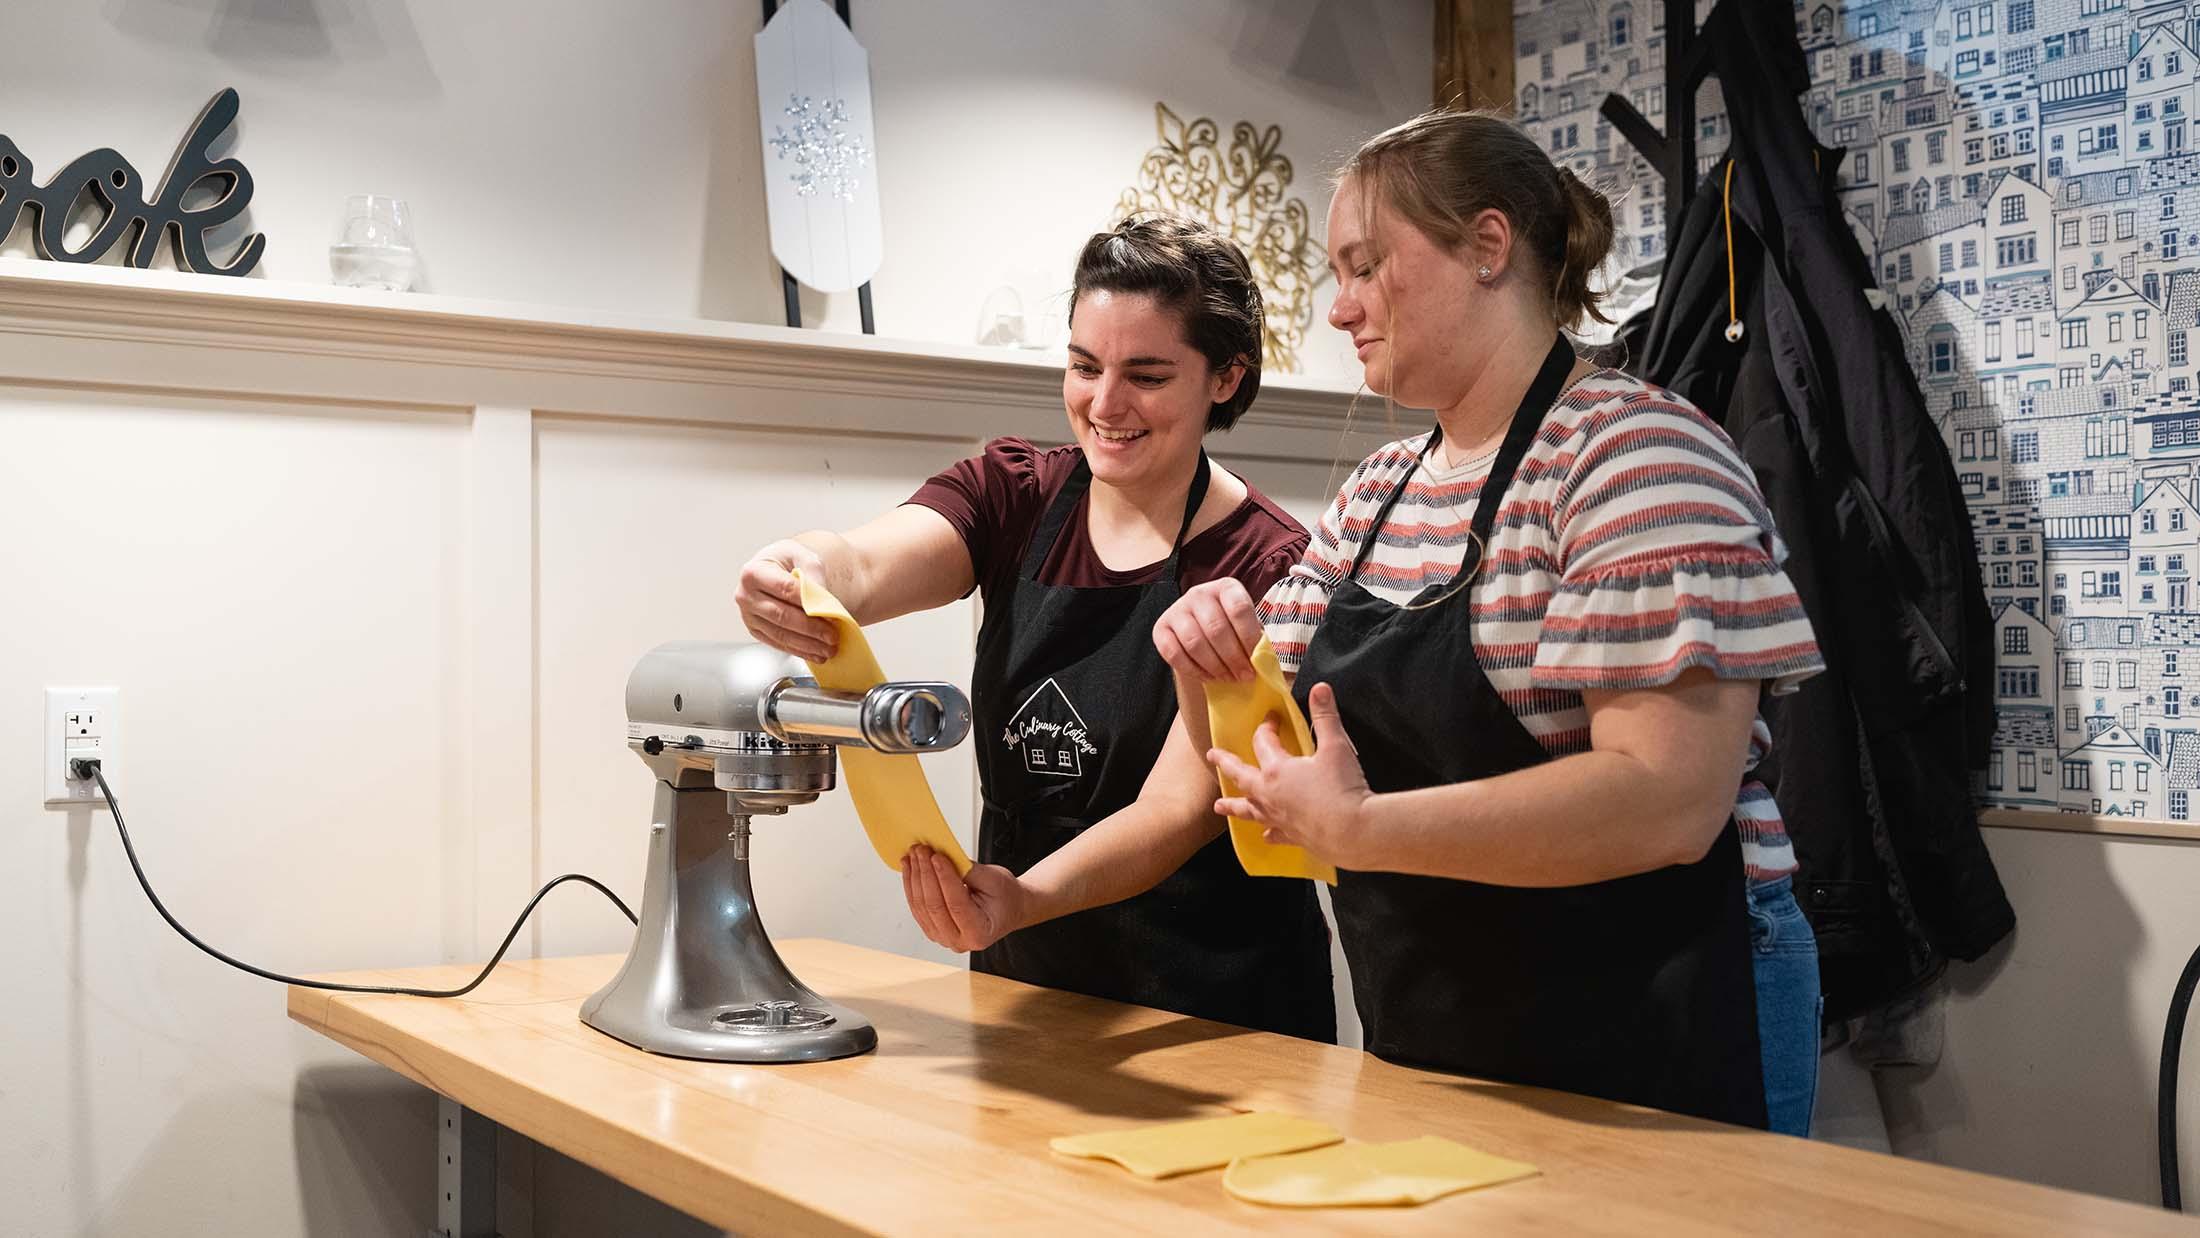 Two people making pasta at a cooking class.